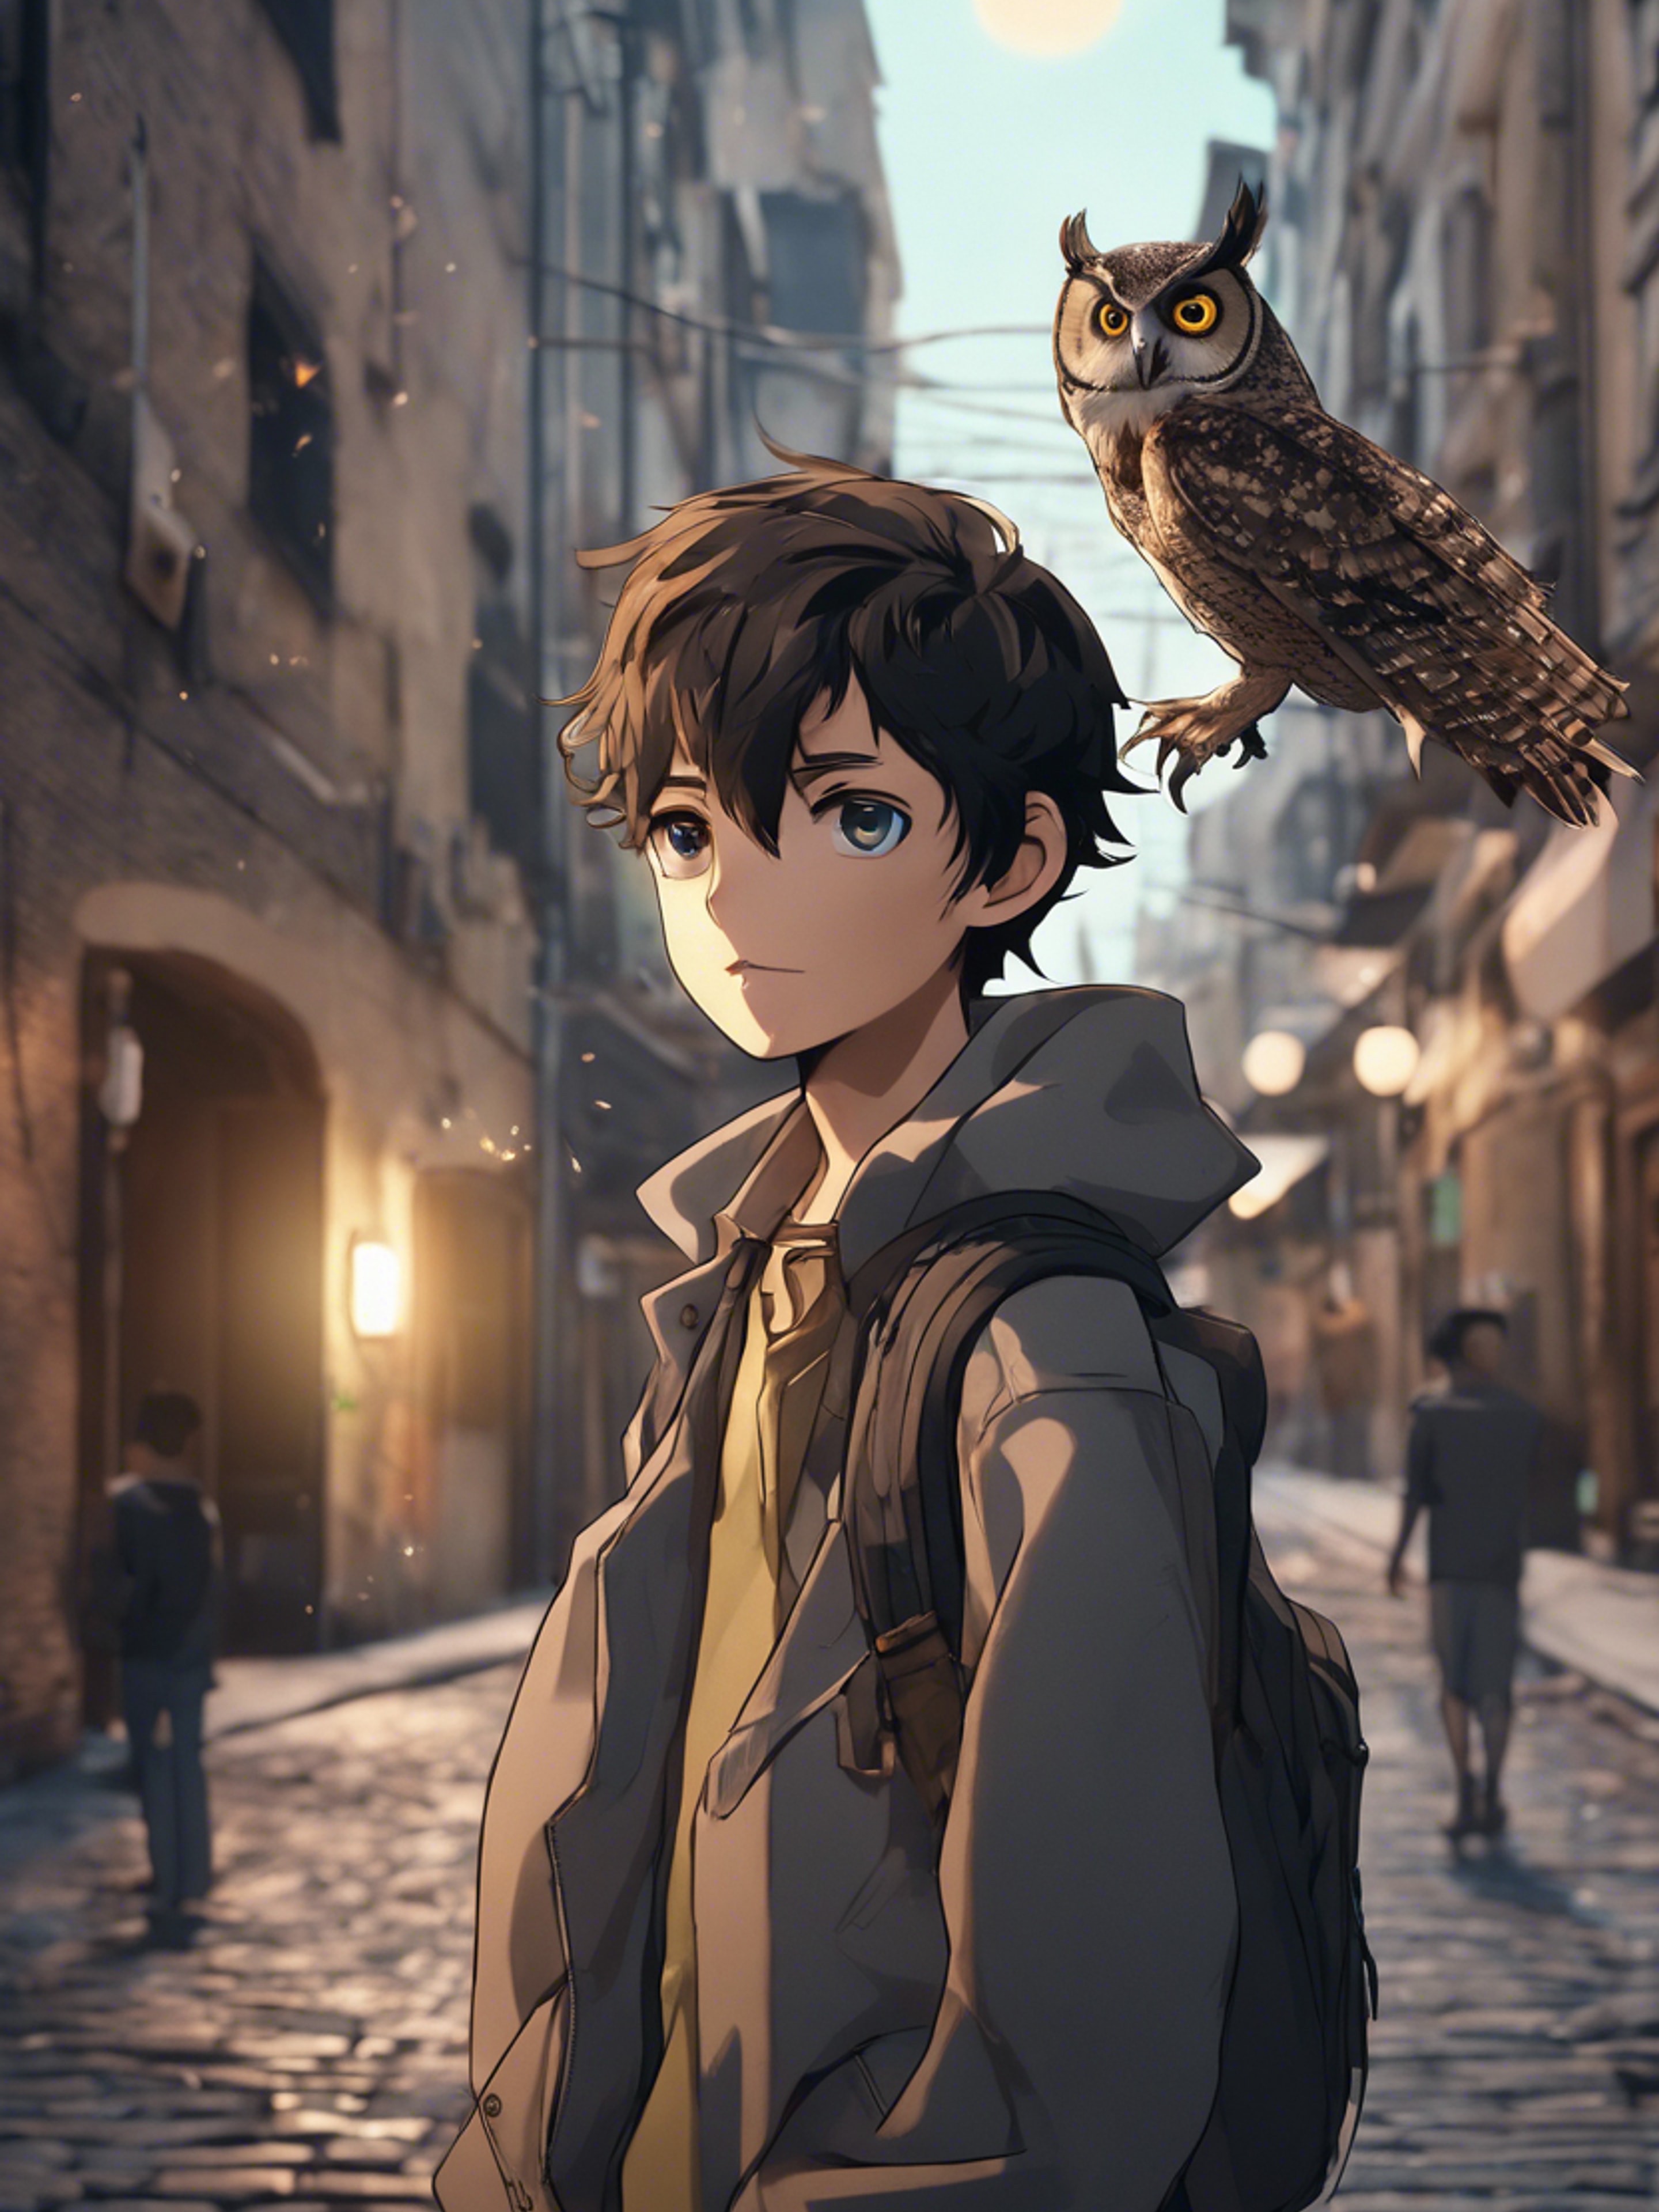 An anime boy with an owl perched on his arm, walking in an old, street-lit city. Wallpaper[78f84a88ca794e01bcda]